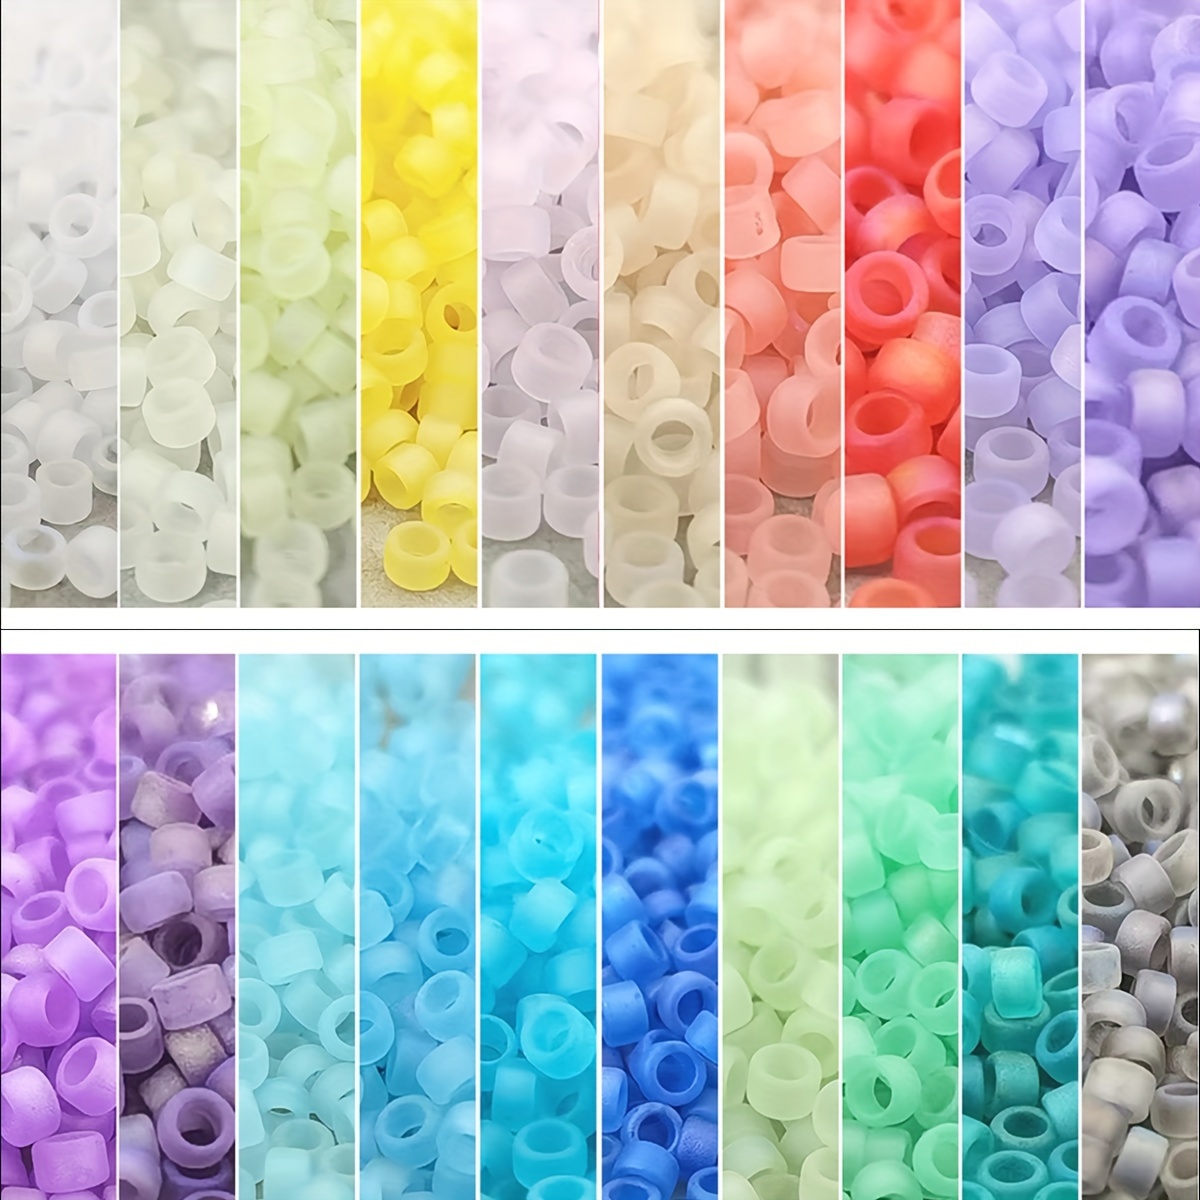 

6850-piece Matte Rice Beads Set In 20 Colors - 100g (3.52oz) Piece For Diy Bracelets, Necklaces, Jewelry Crafting & French Embroidery - Perfect Gift For Moms And Friends